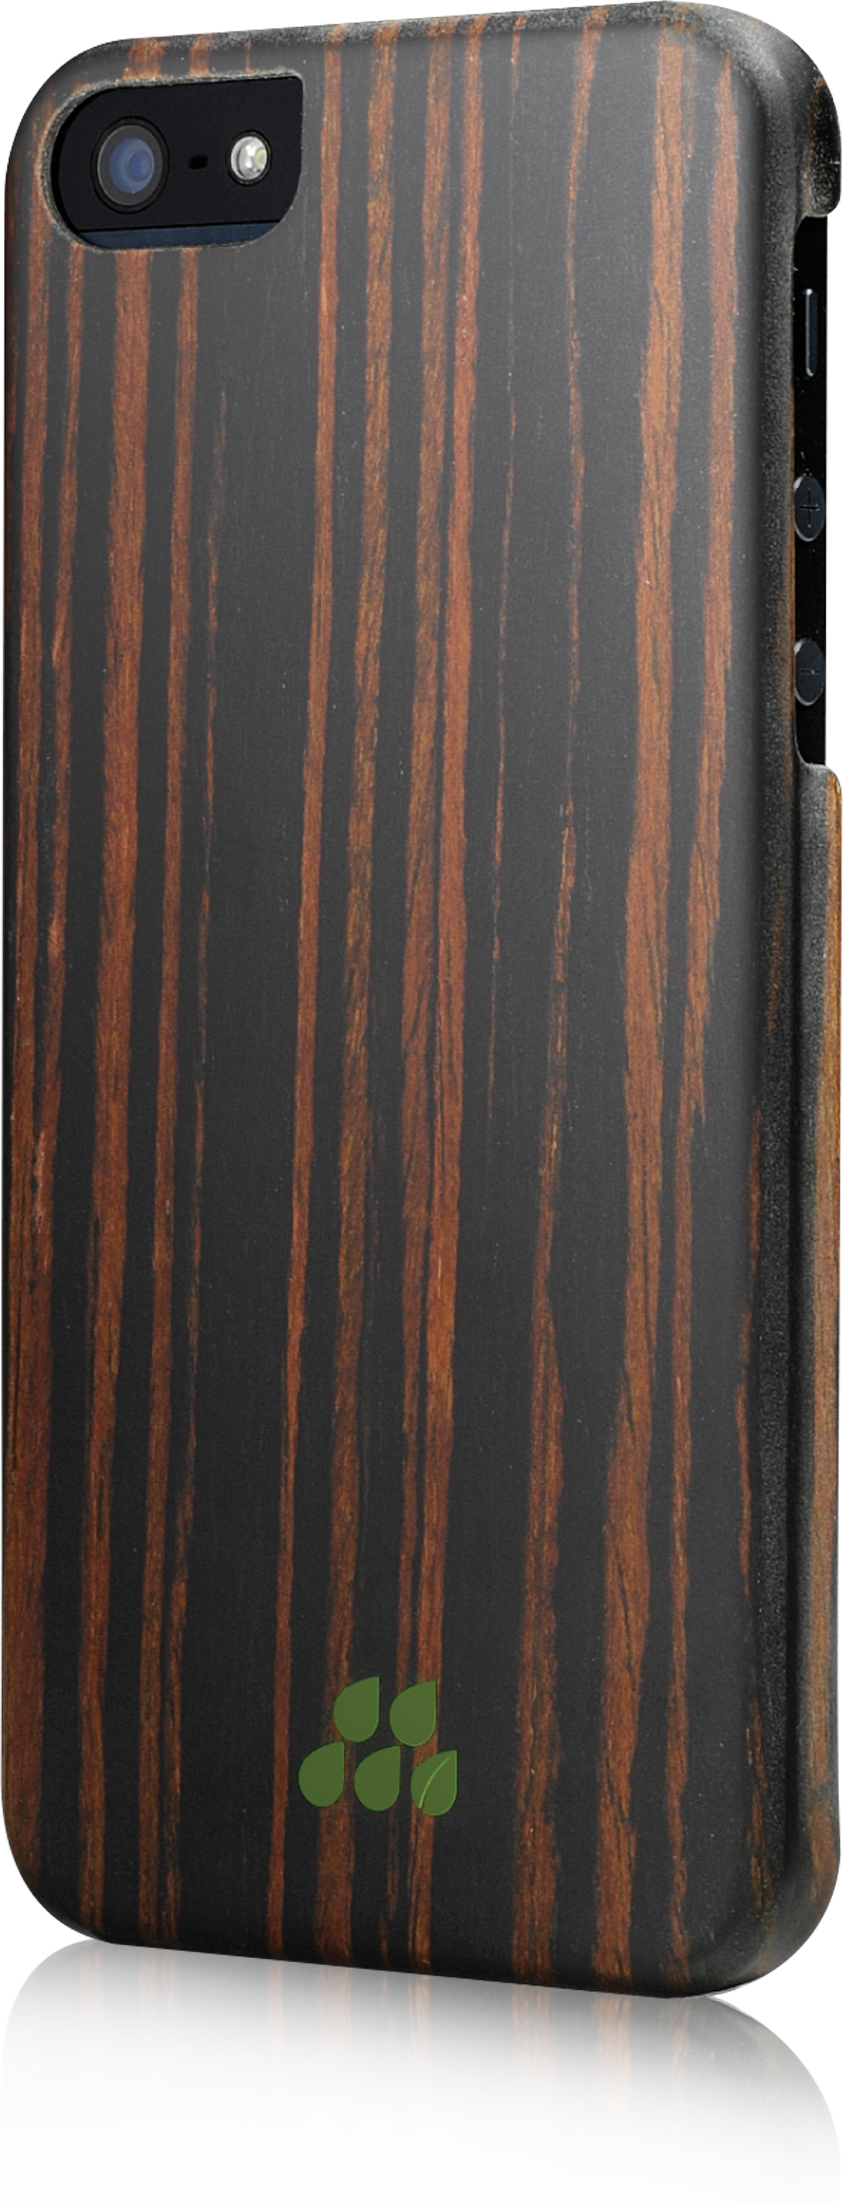 Evutec Wood S Series in Ebony for iPhone 5 and 5S